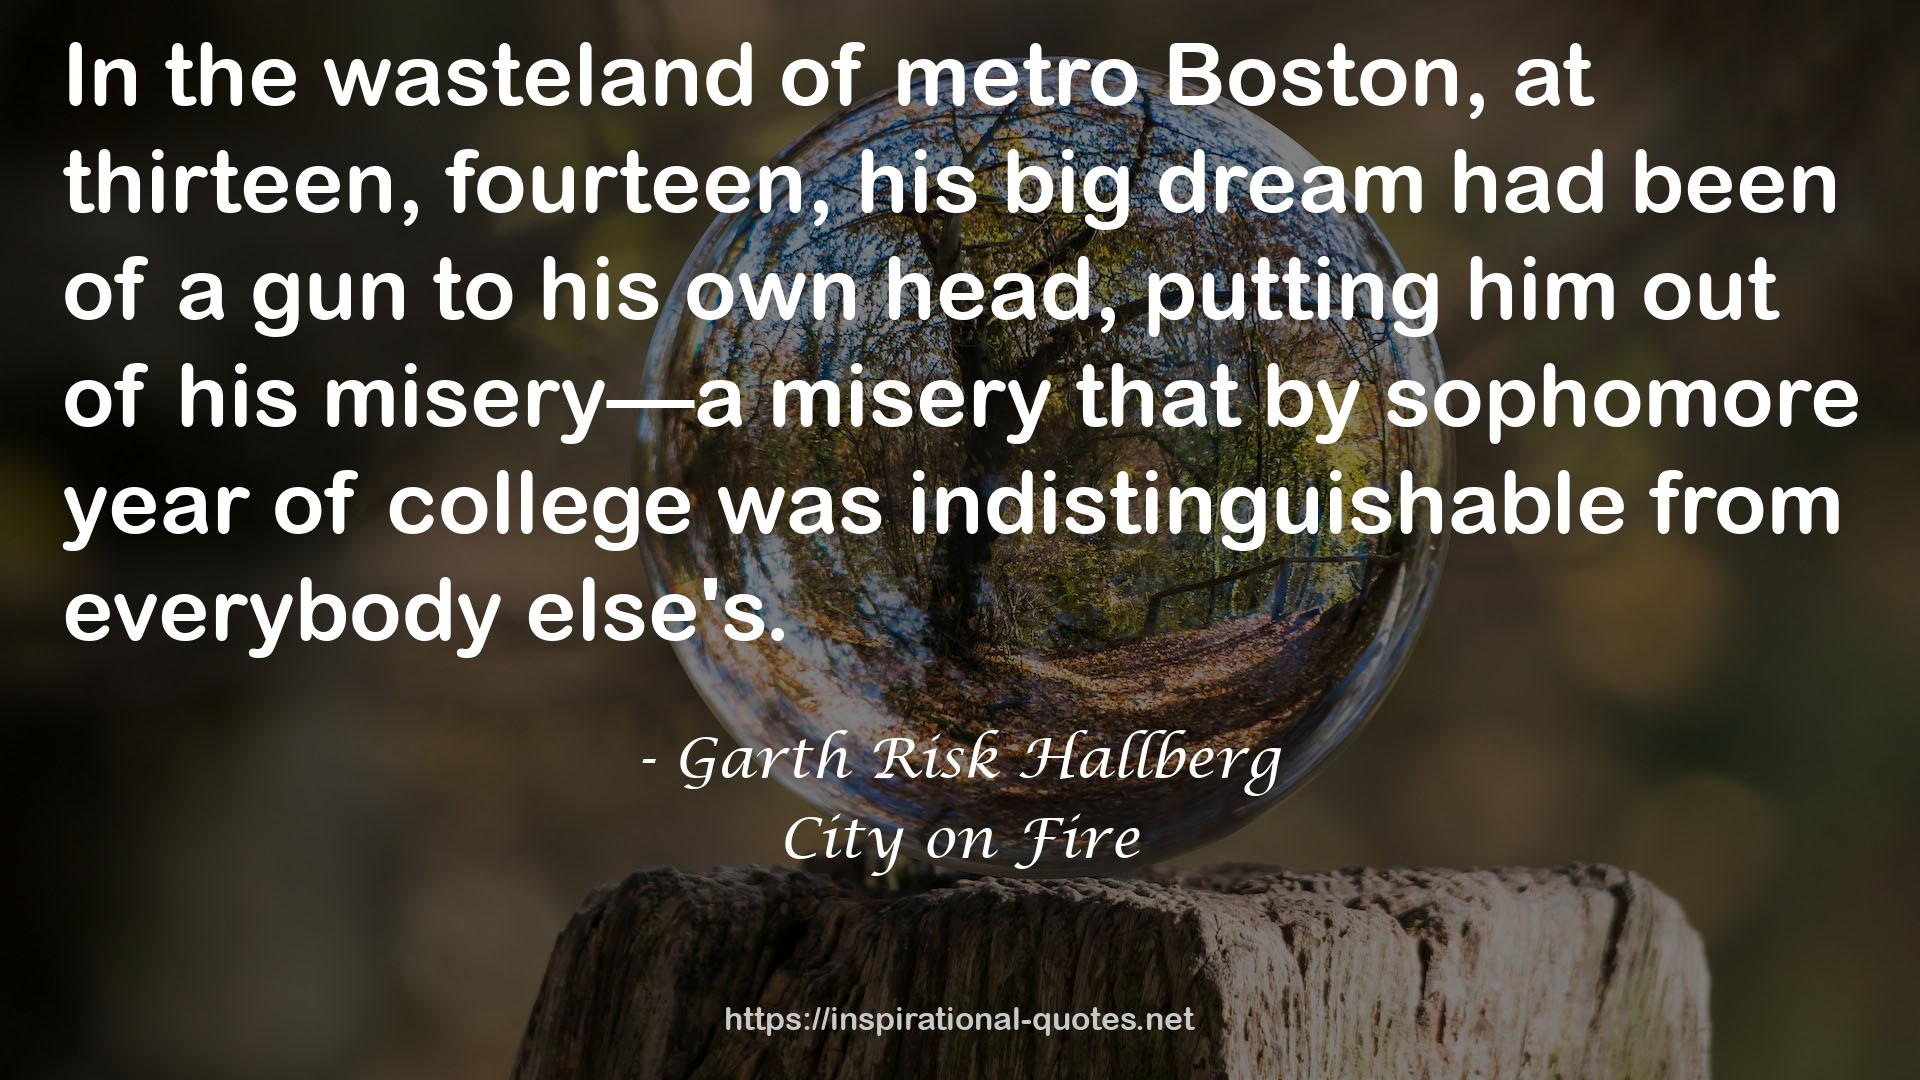 City on Fire QUOTES